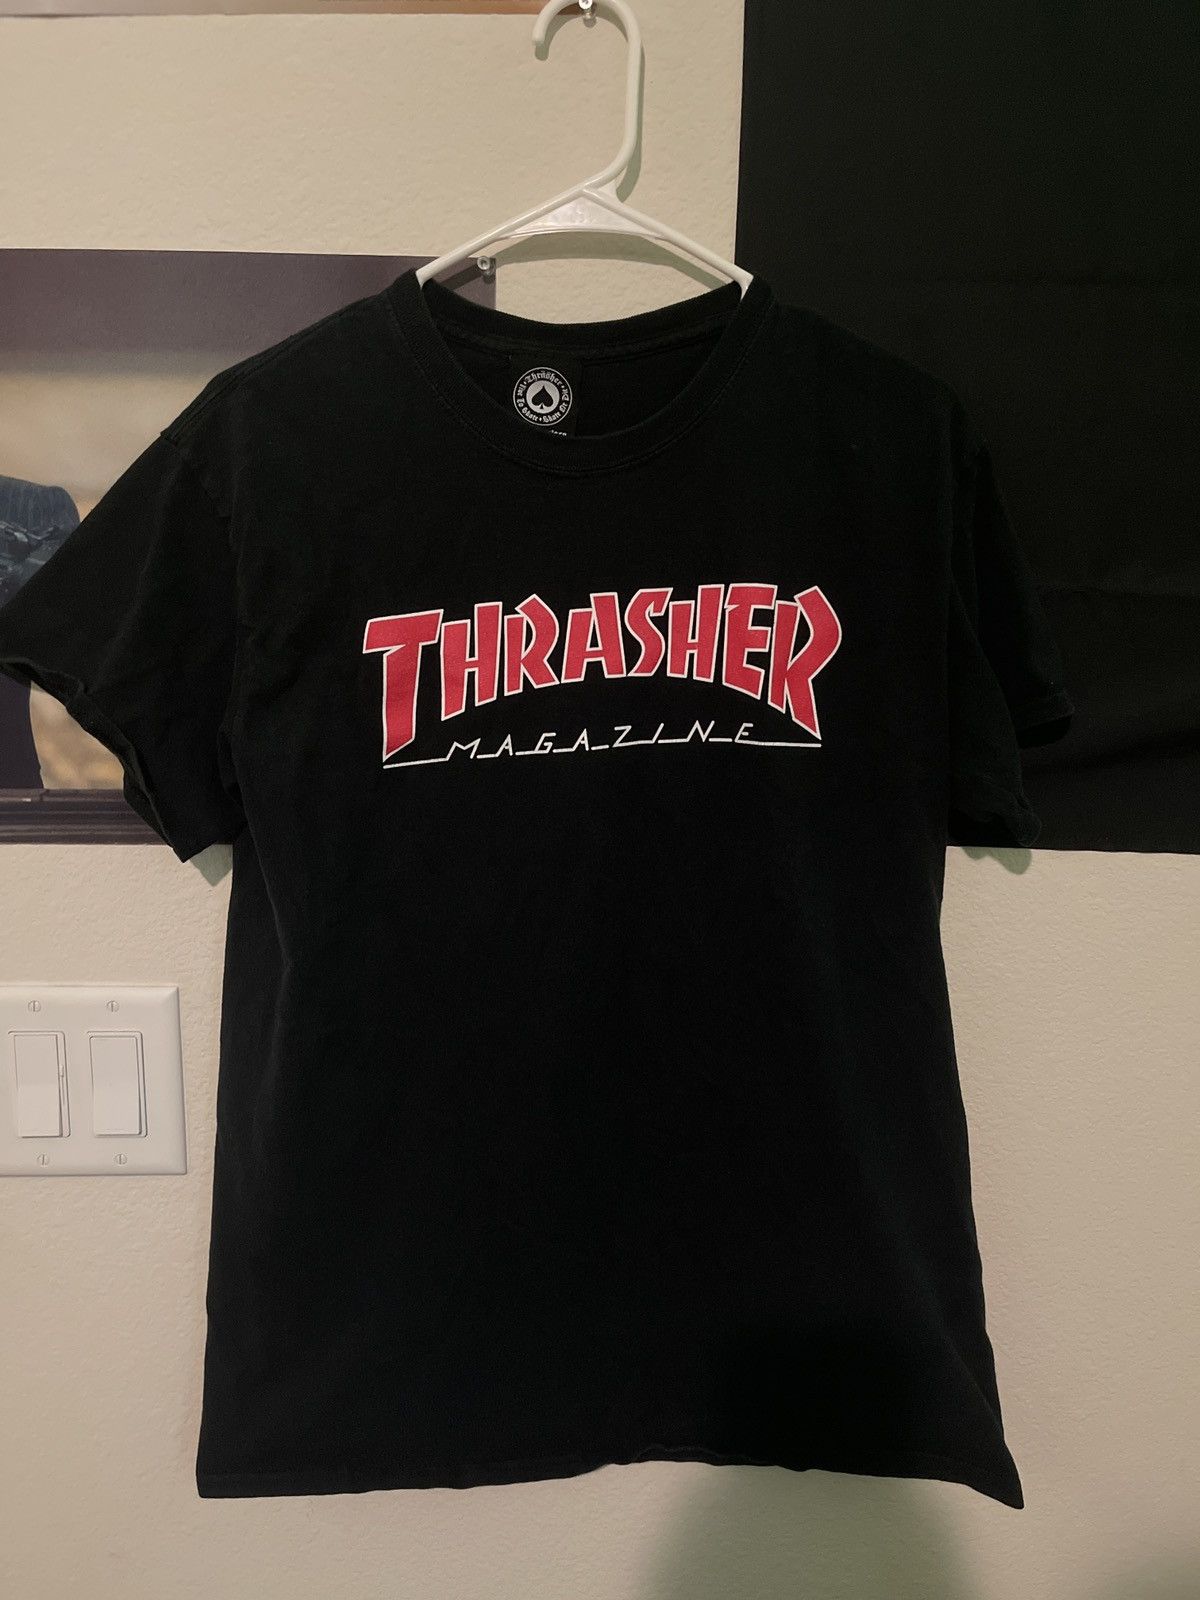 Vintage Thrasher Tee Gently Used Size US M / EU 48-50 / 2 - 1 Preview